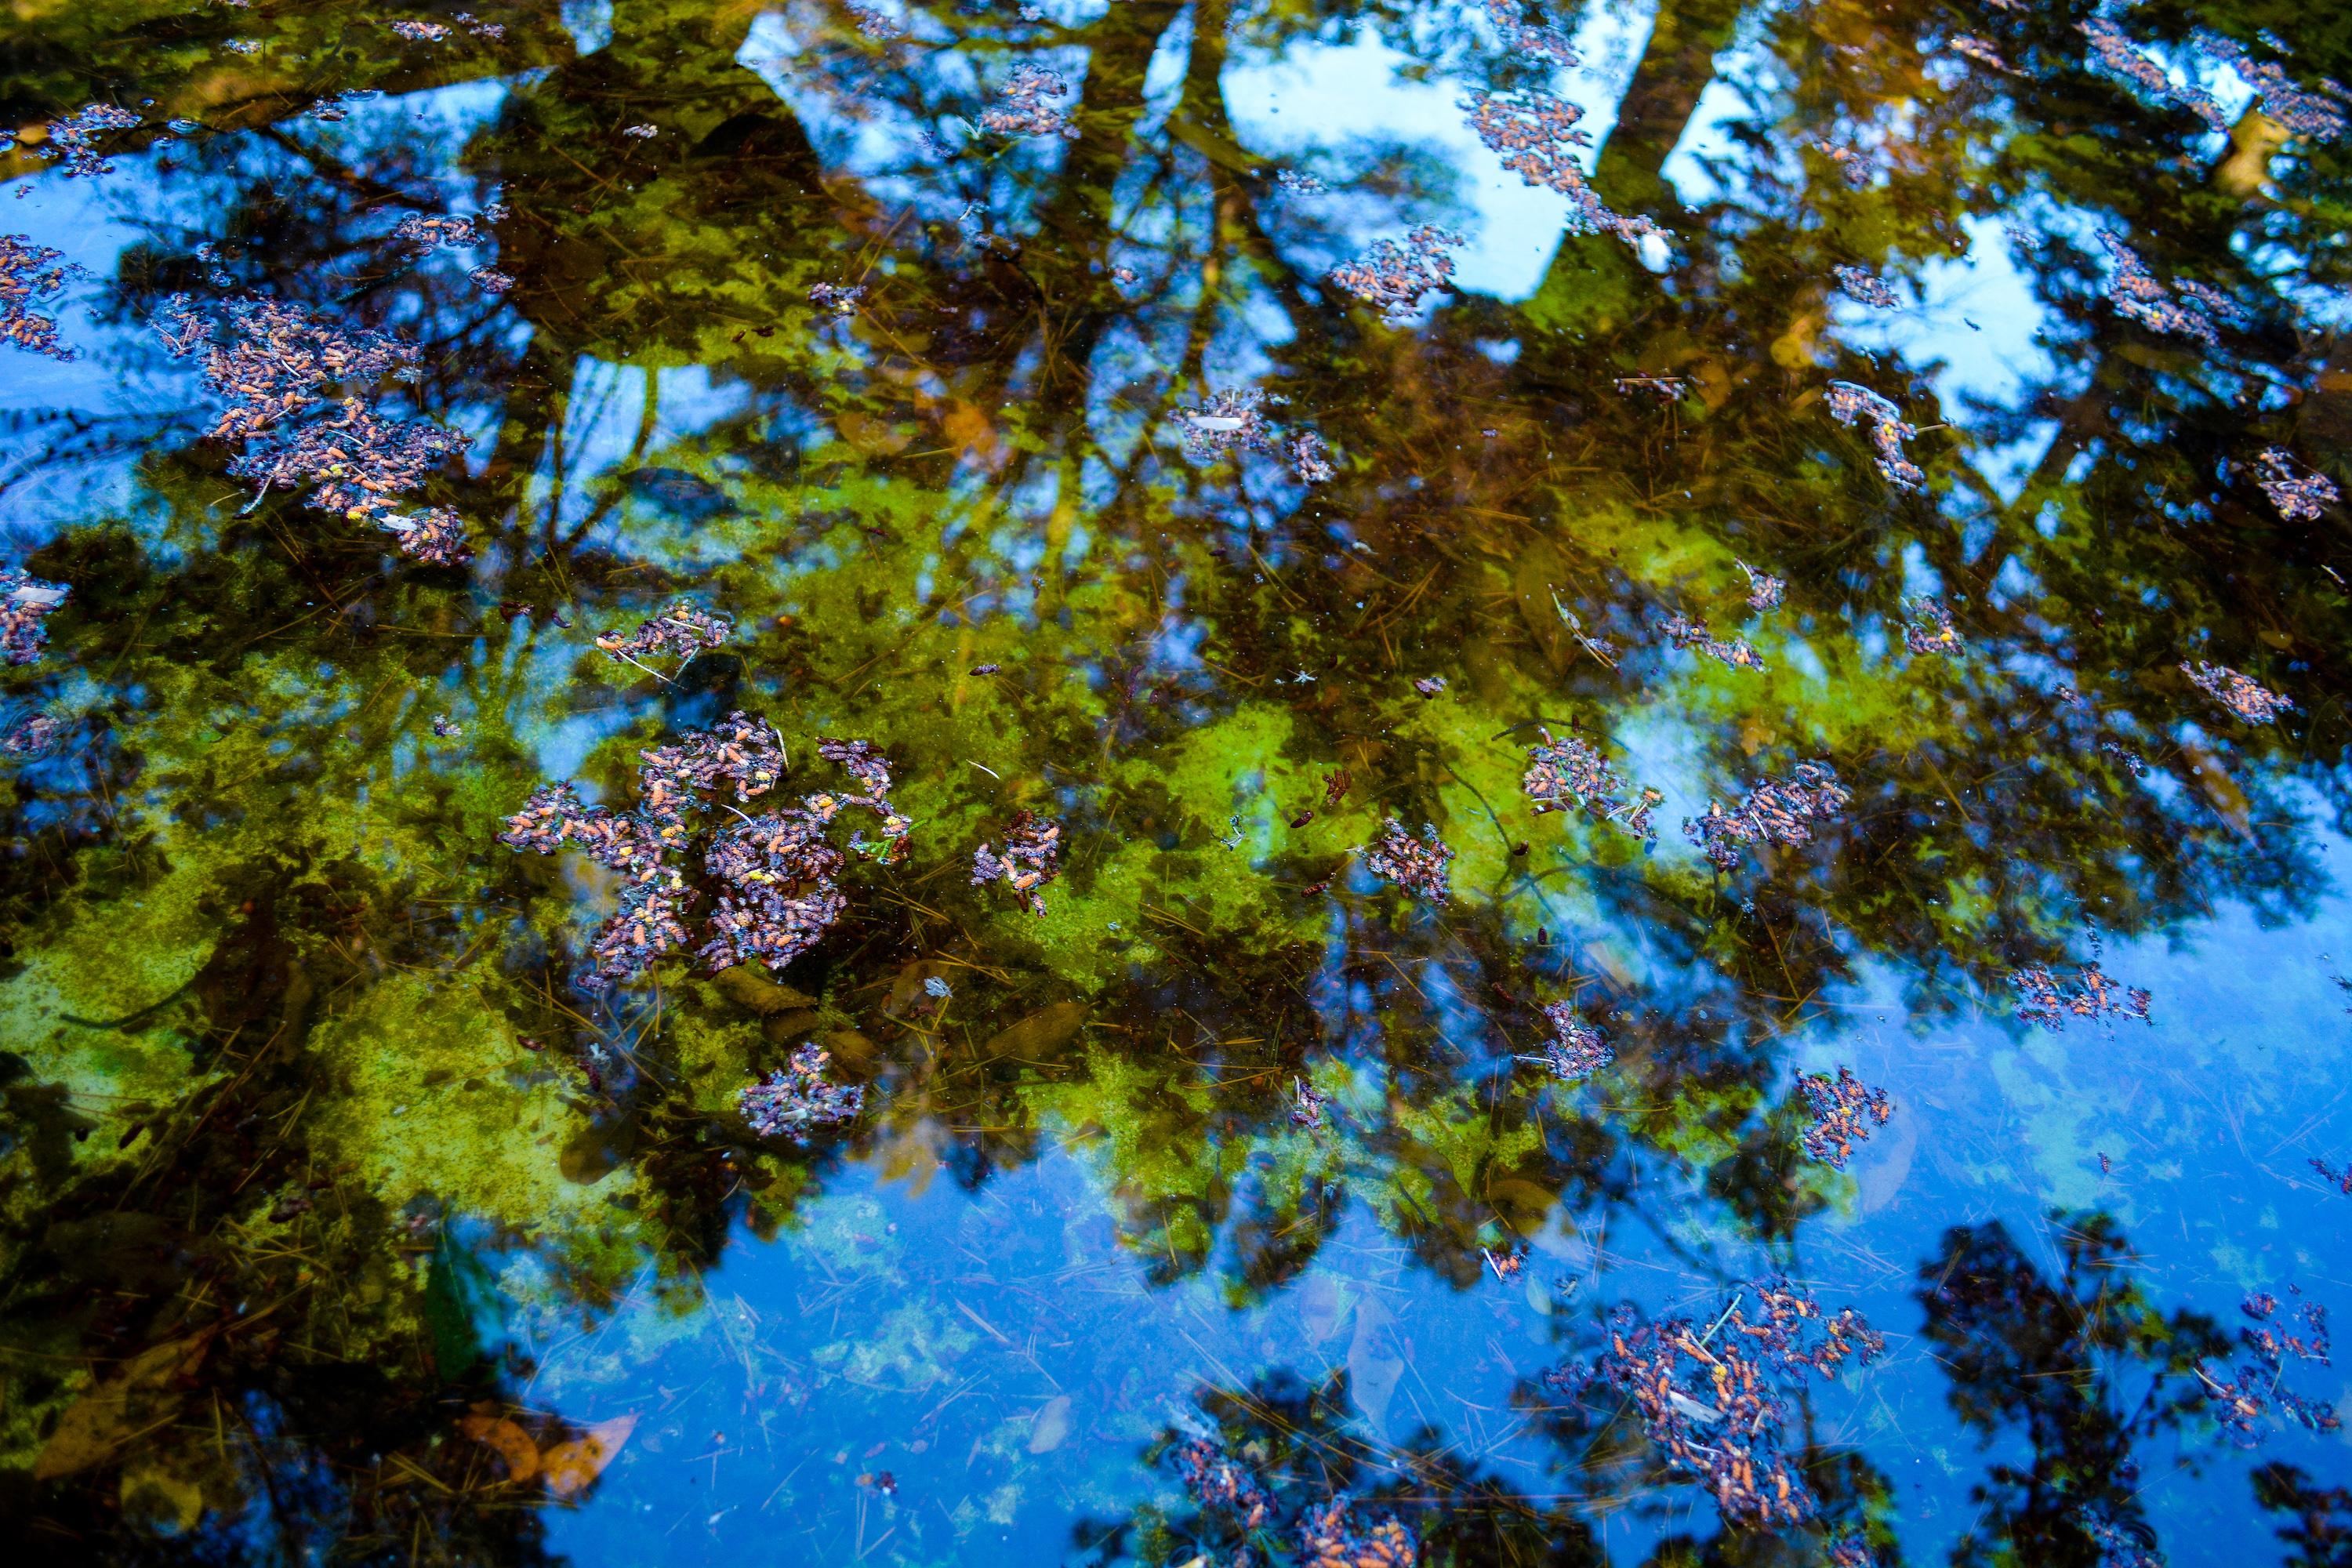 Reflection No. 1 - Meditative Print of Water and Trees. in (Blue+Green+Purple)